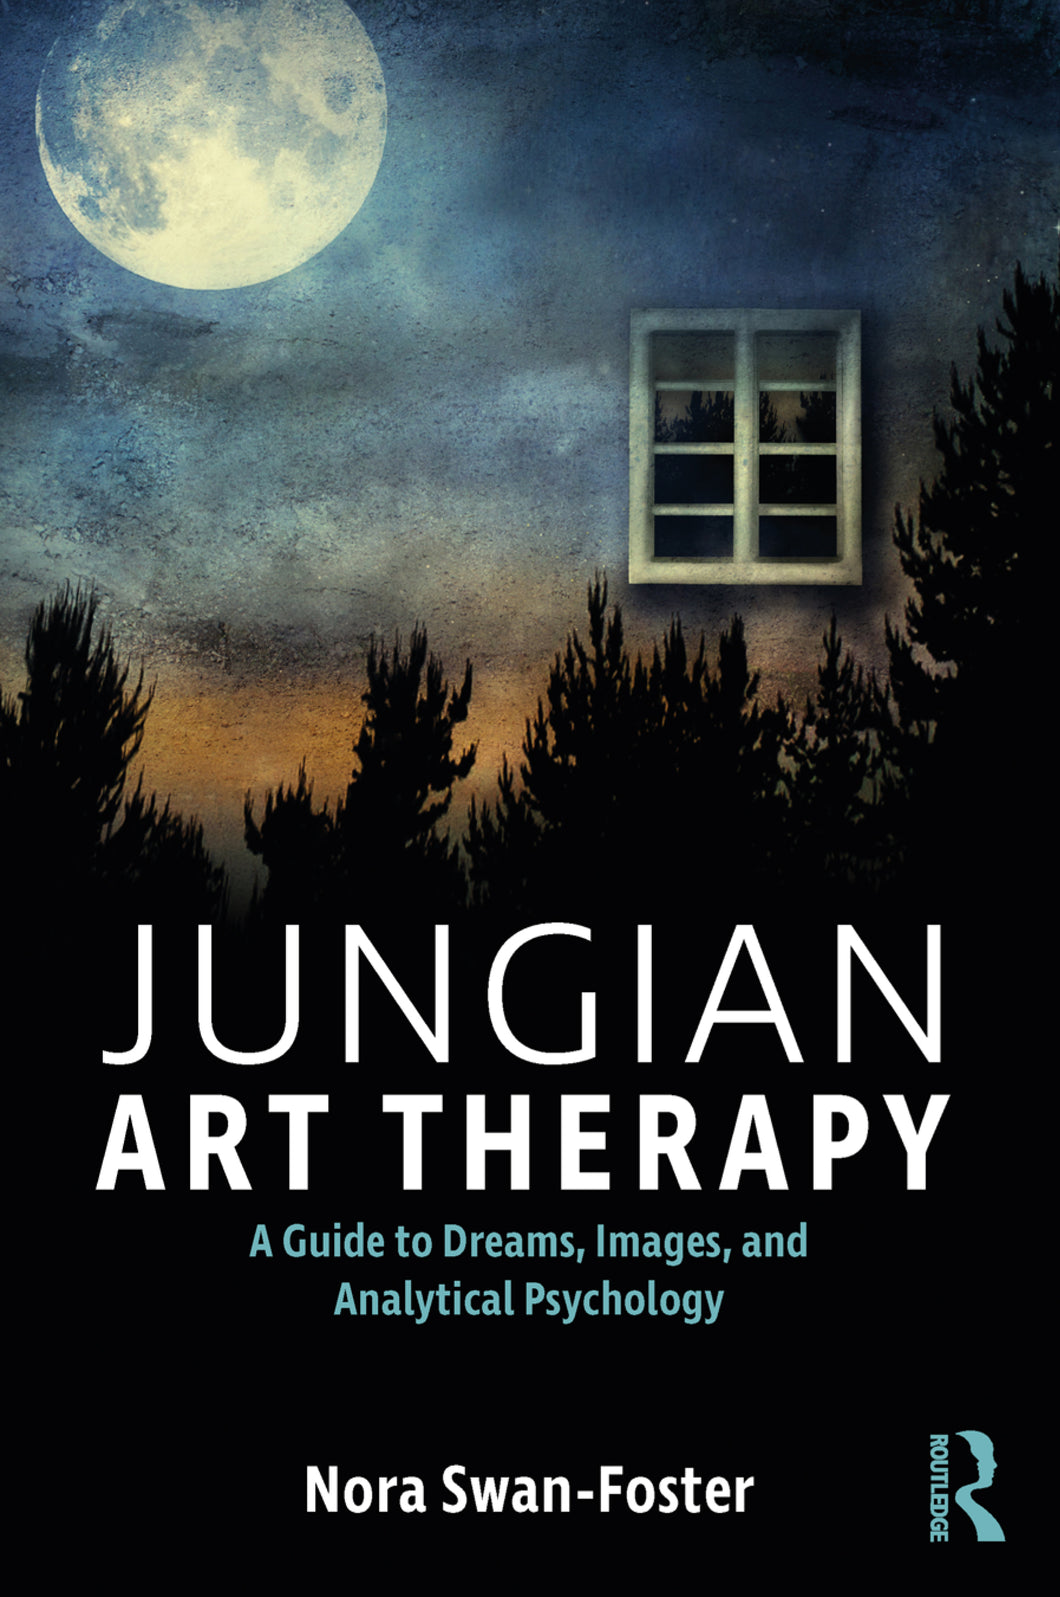 Jungian Art Therapy: Images, Dreams, and Analytical Psychology – 1st Edition